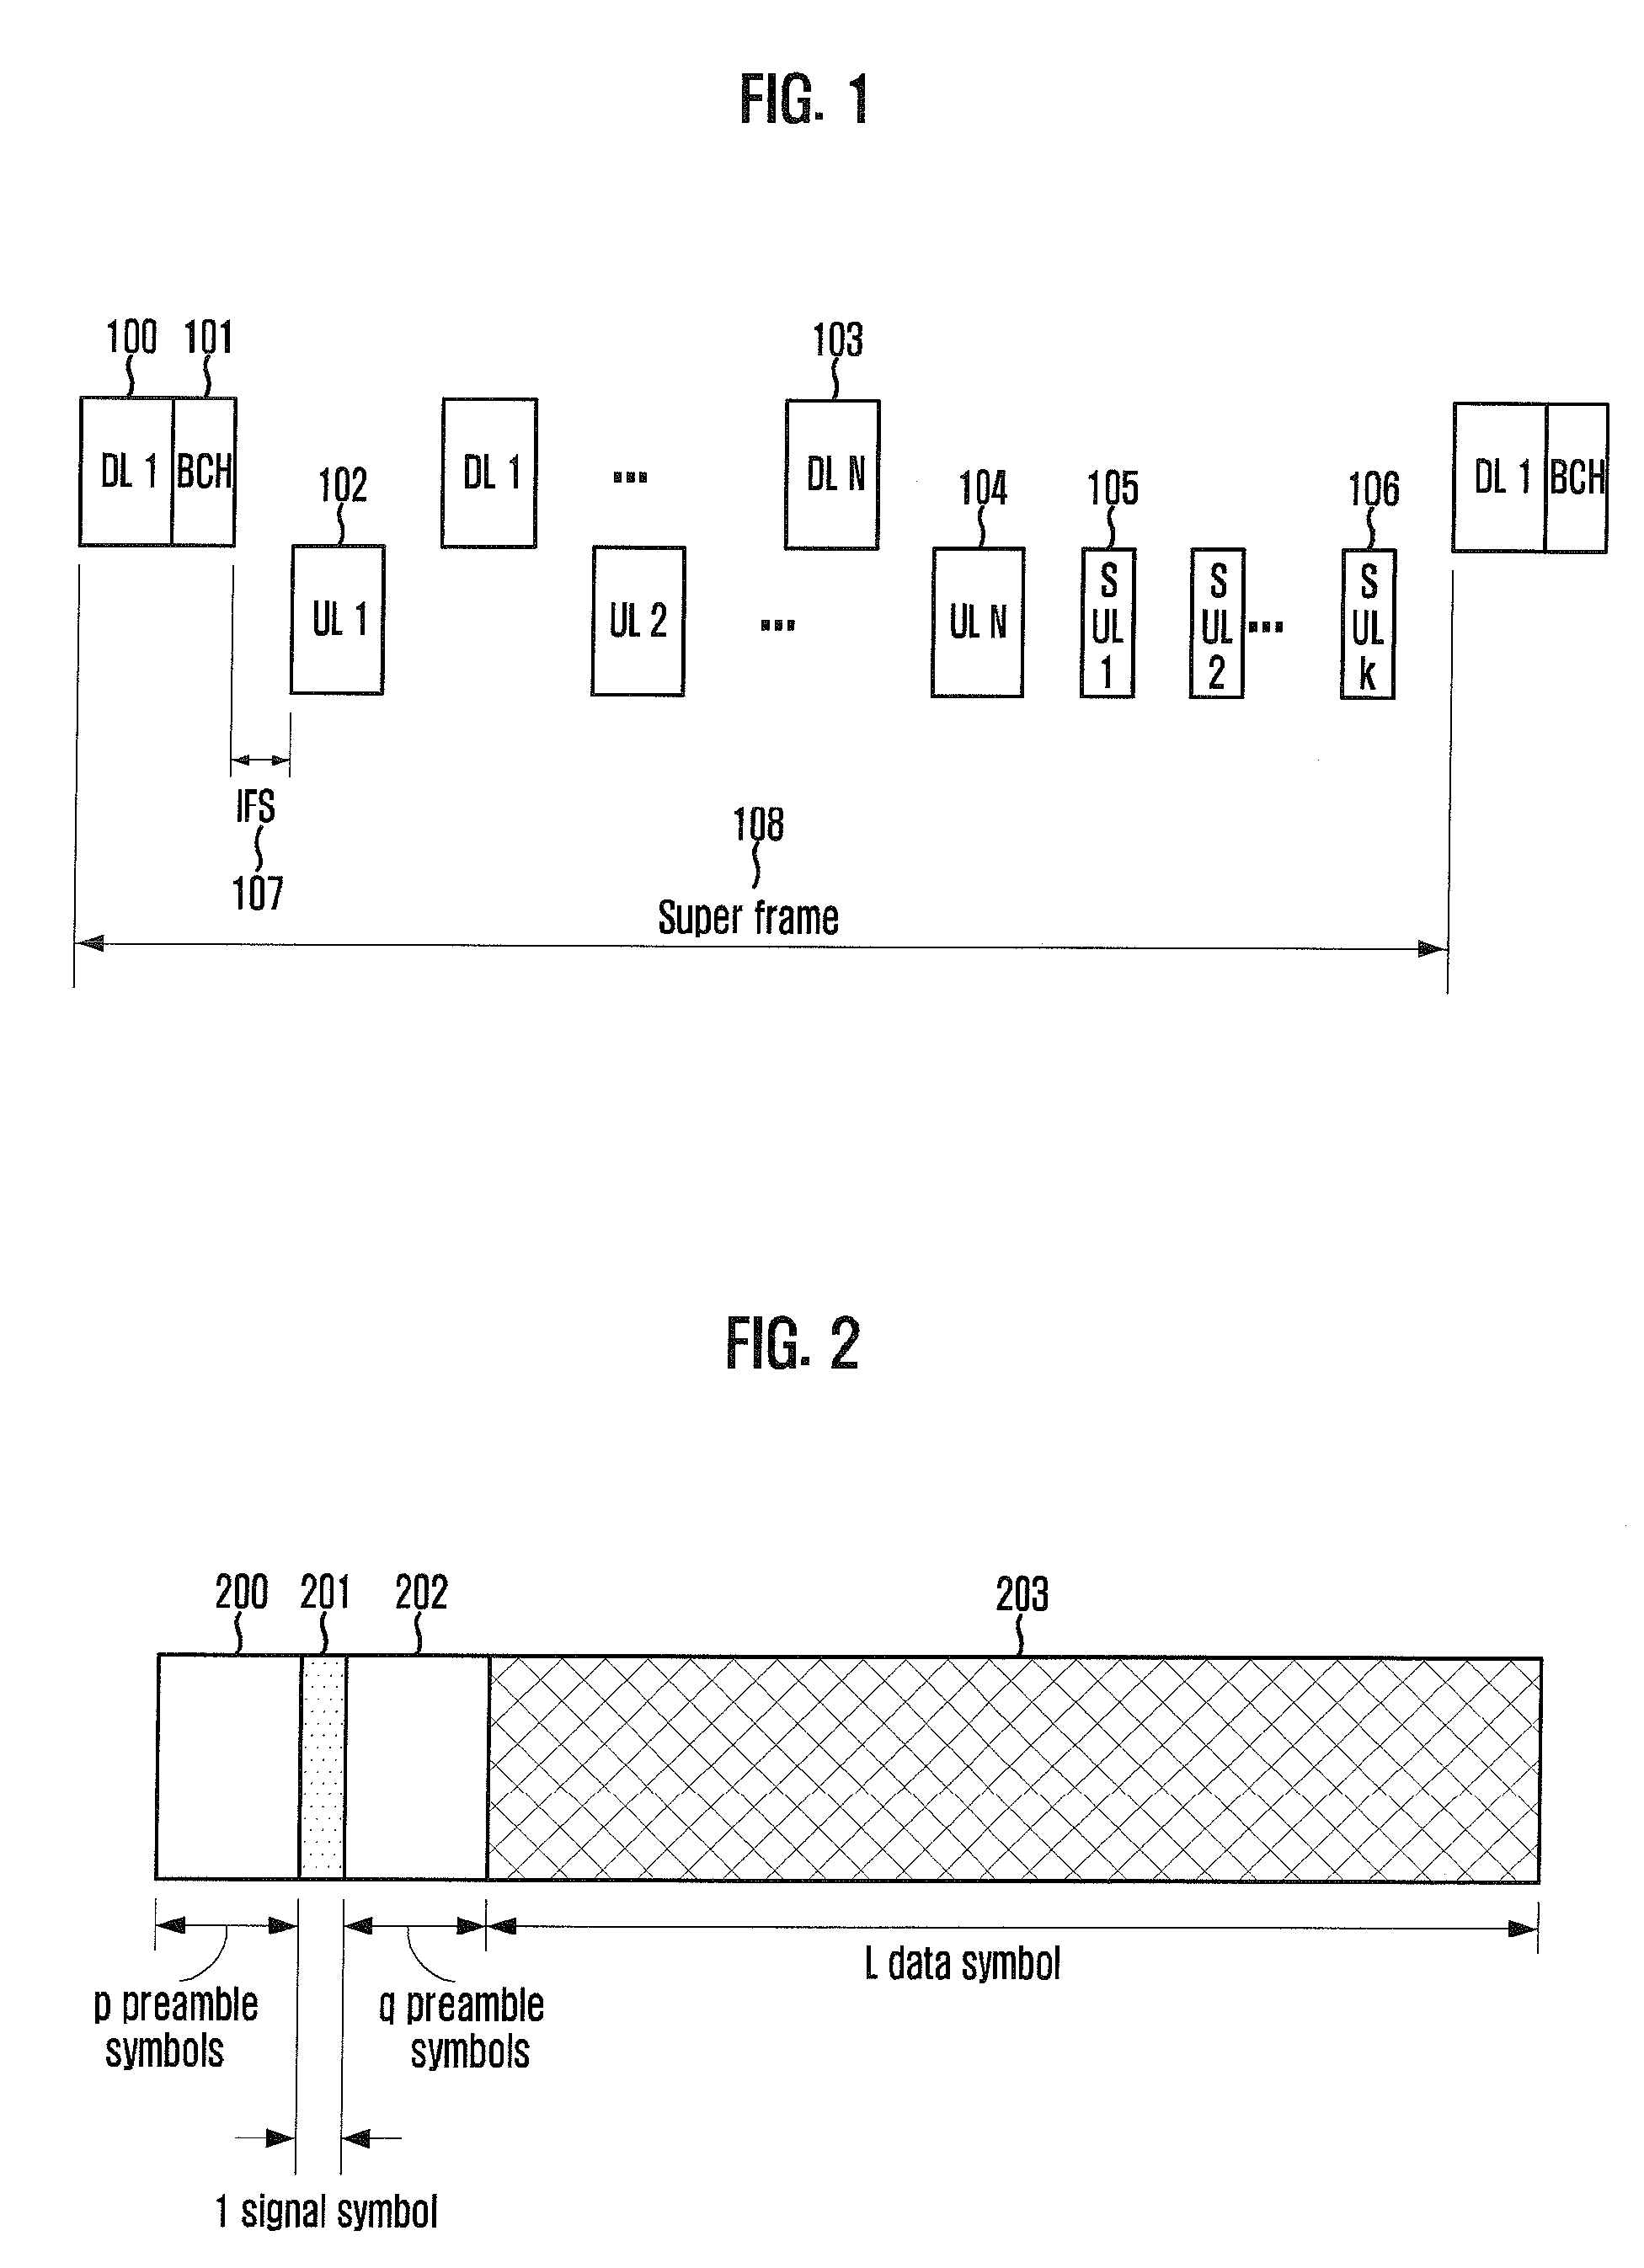 Method for forming frame in wideband wireless communication system using multi-antenna